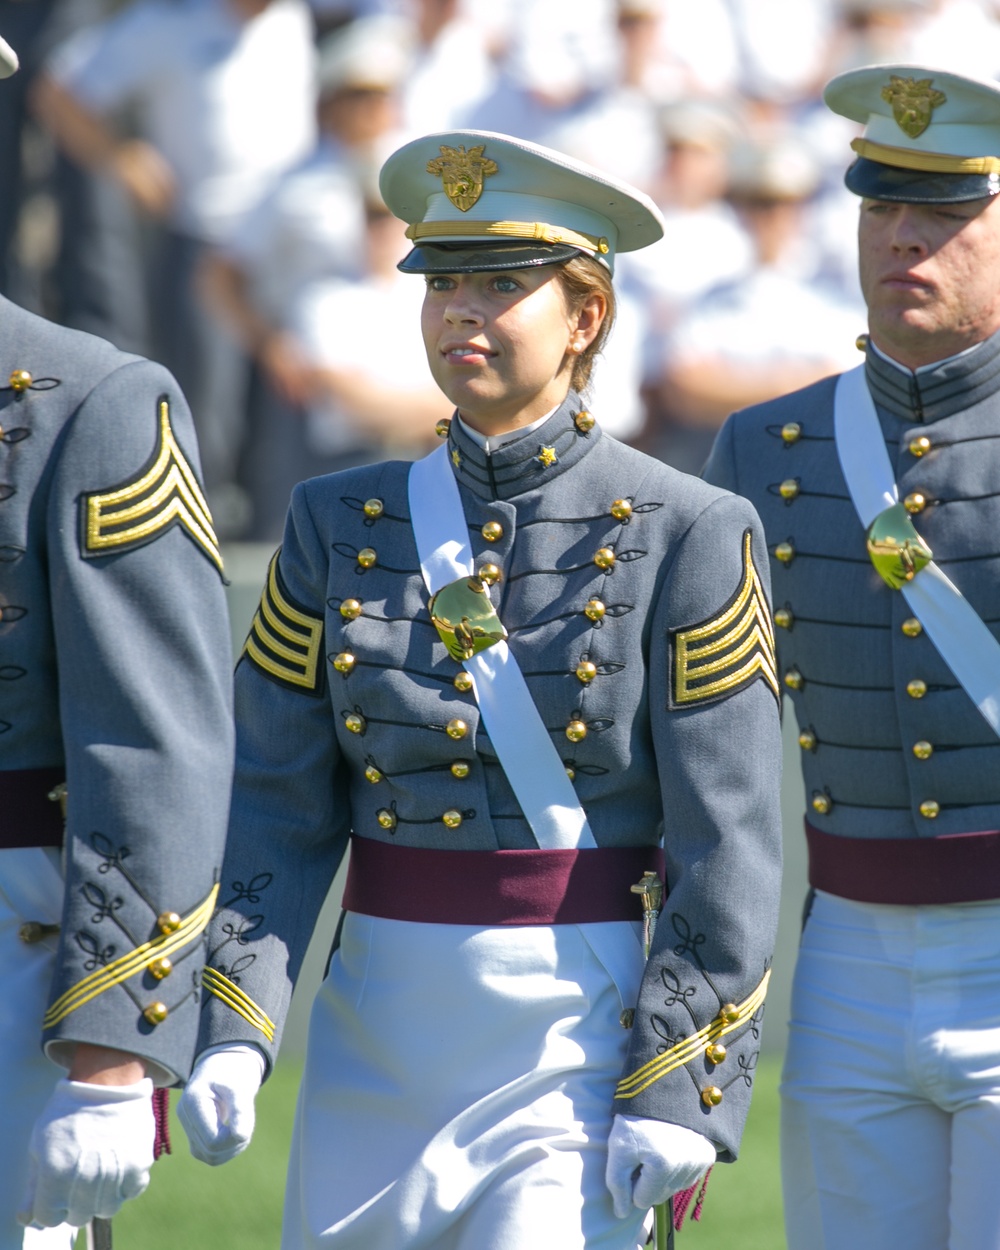 USMA Class of 2017 enters Michie Stadium for commencement